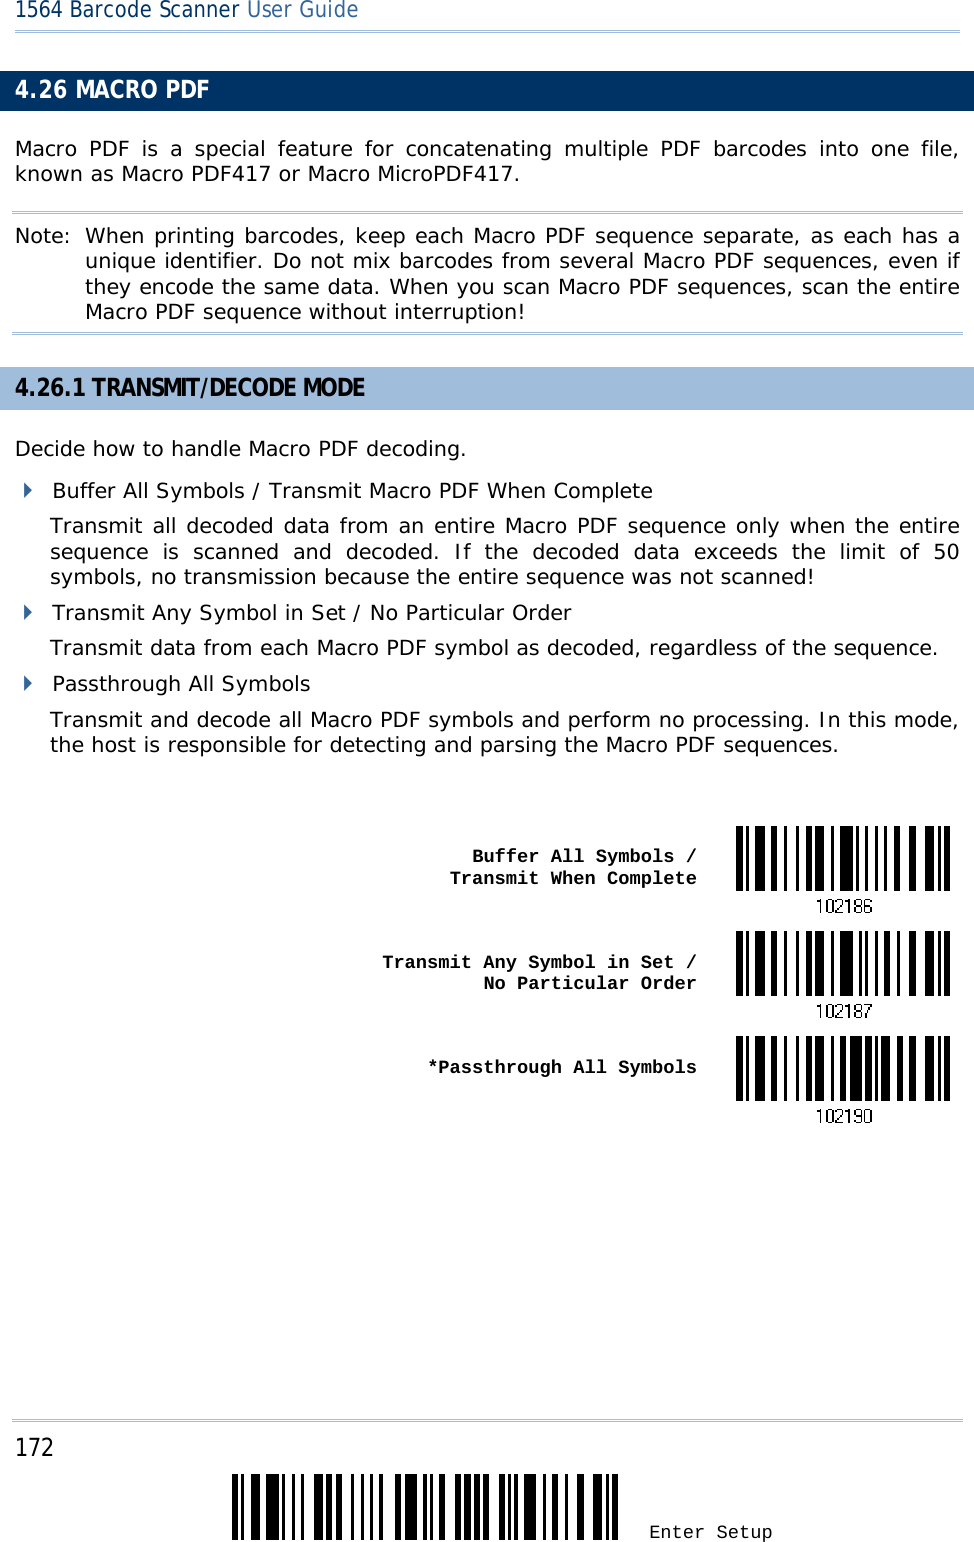 172 Enter Setup 1564 Barcode Scanner User Guide  4.26 MACRO PDF Macro PDF is a special feature for concatenating multiple PDF barcodes into one file, known as Macro PDF417 or Macro MicroPDF417. Note: When printing barcodes, keep each Macro PDF sequence separate, as each has a unique identifier. Do not mix barcodes from several Macro PDF sequences, even if they encode the same data. When you scan Macro PDF sequences, scan the entire Macro PDF sequence without interruption! 4.26.1 TRANSMIT/DECODE MODE Decide how to handle Macro PDF decoding.  Buffer All Symbols / Transmit Macro PDF When Complete Transmit all decoded data from an entire Macro PDF sequence only when the entire sequence is scanned and decoded. If the decoded data exceeds the limit of 50 symbols, no transmission because the entire sequence was not scanned!  Transmit Any Symbol in Set / No Particular Order Transmit data from each Macro PDF symbol as decoded, regardless of the sequence.  Passthrough All Symbols Transmit and decode all Macro PDF symbols and perform no processing. In this mode, the host is responsible for detecting and parsing the Macro PDF sequences.   Buffer All Symbols /  Transmit When Complete Transmit Any Symbol in Set /  No Particular Order *Passthrough All Symbols     